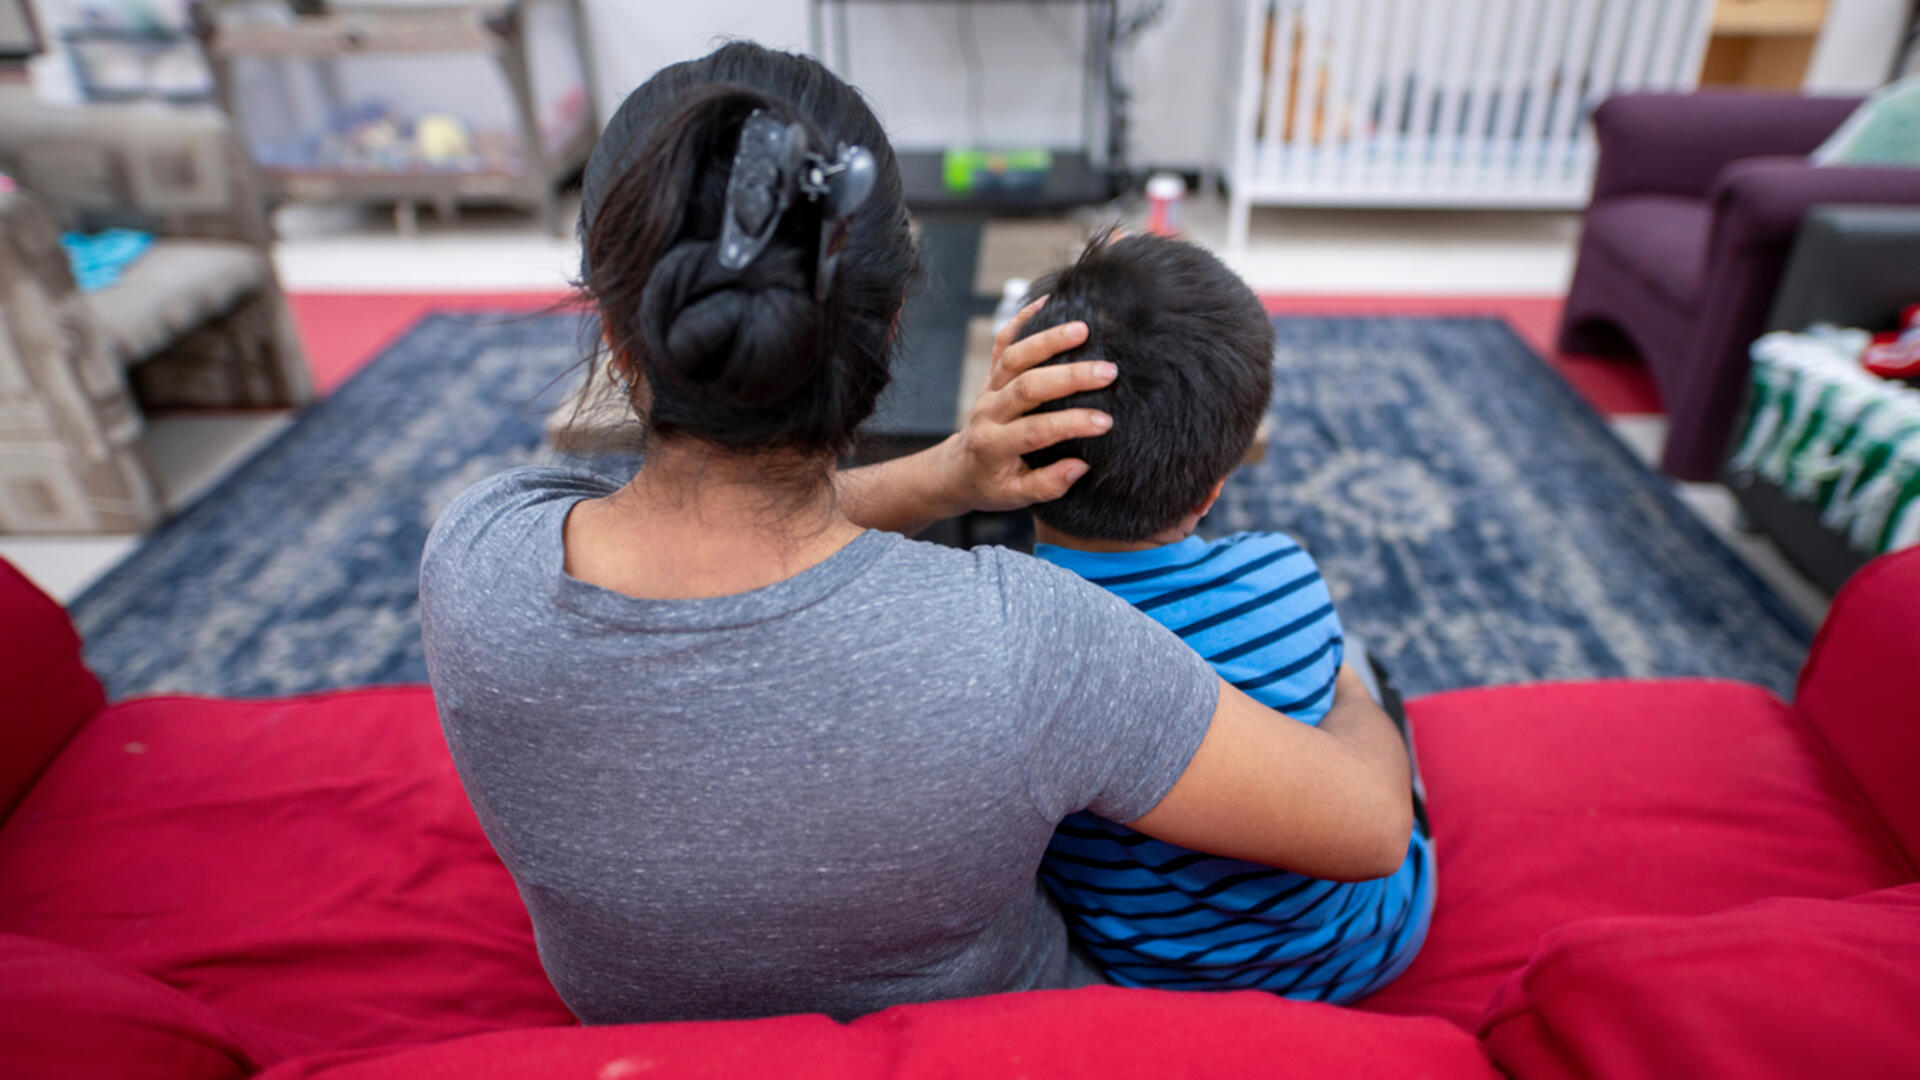 Angelina, an asylum seeker from Guatemala, sits on a red couch with her arms around her son at an IRC Welcome Center in Arizona. 